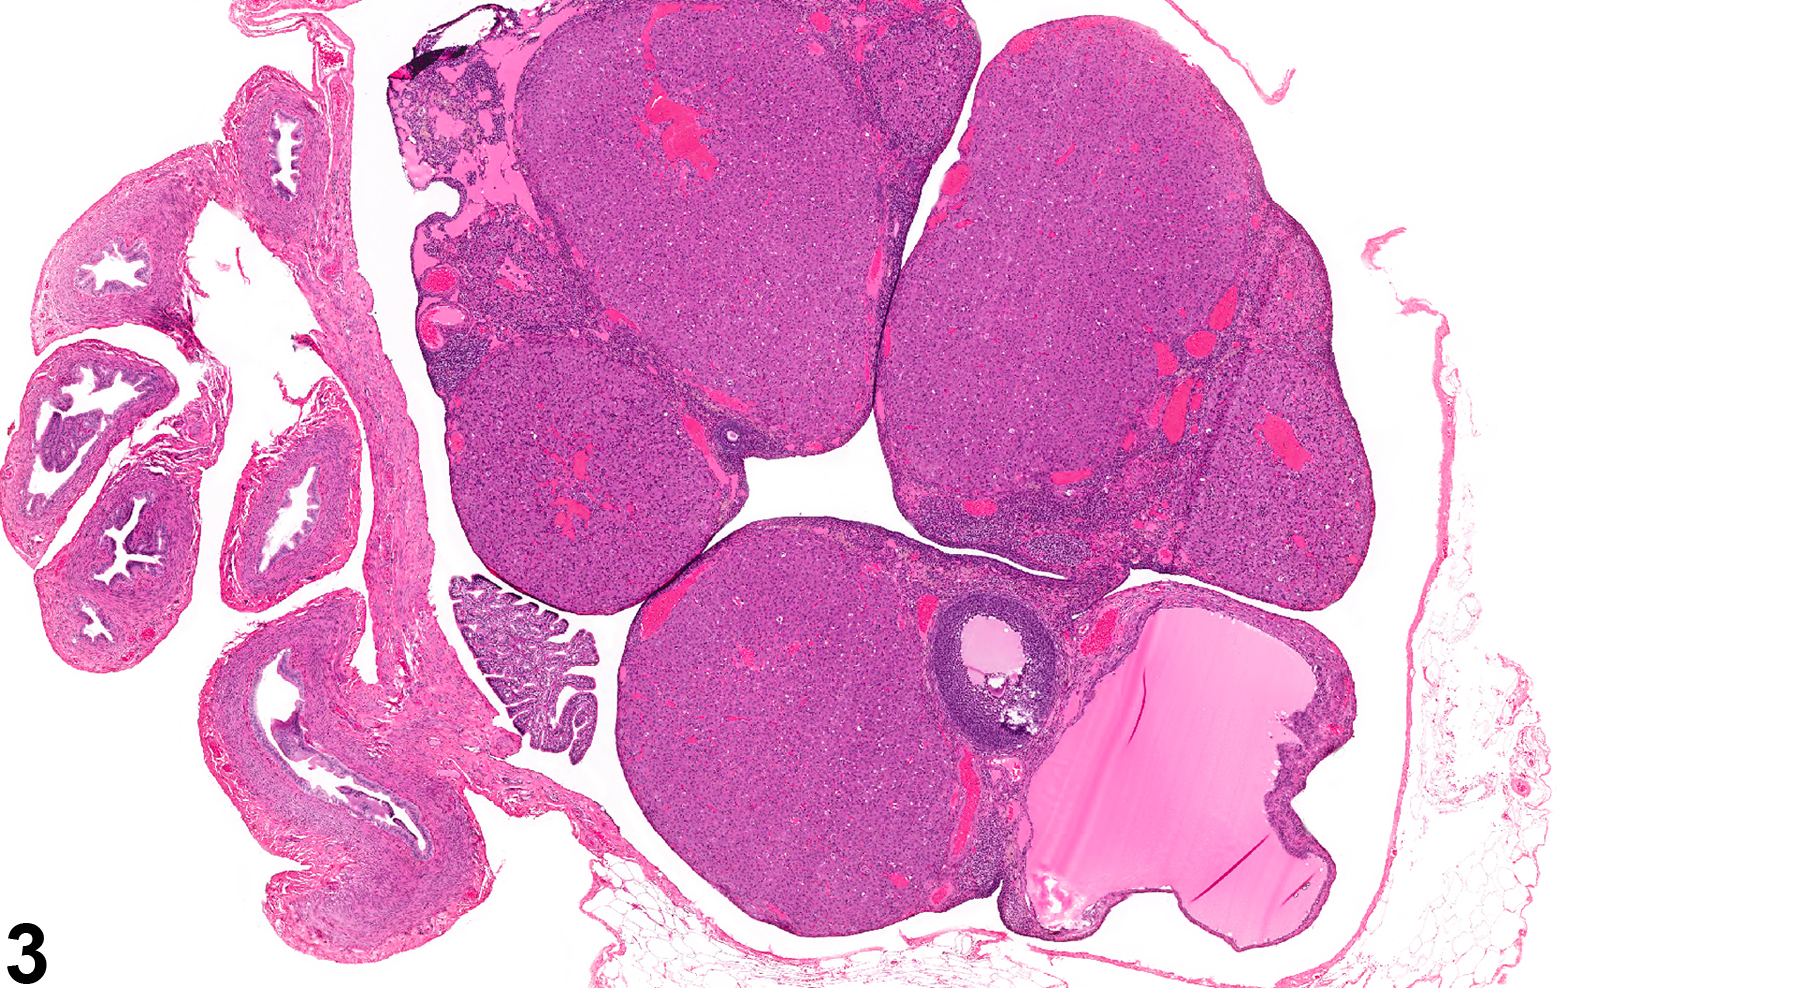 Image of corpus luteal cyst in the ovary from a female F344/N rat in a chronic study